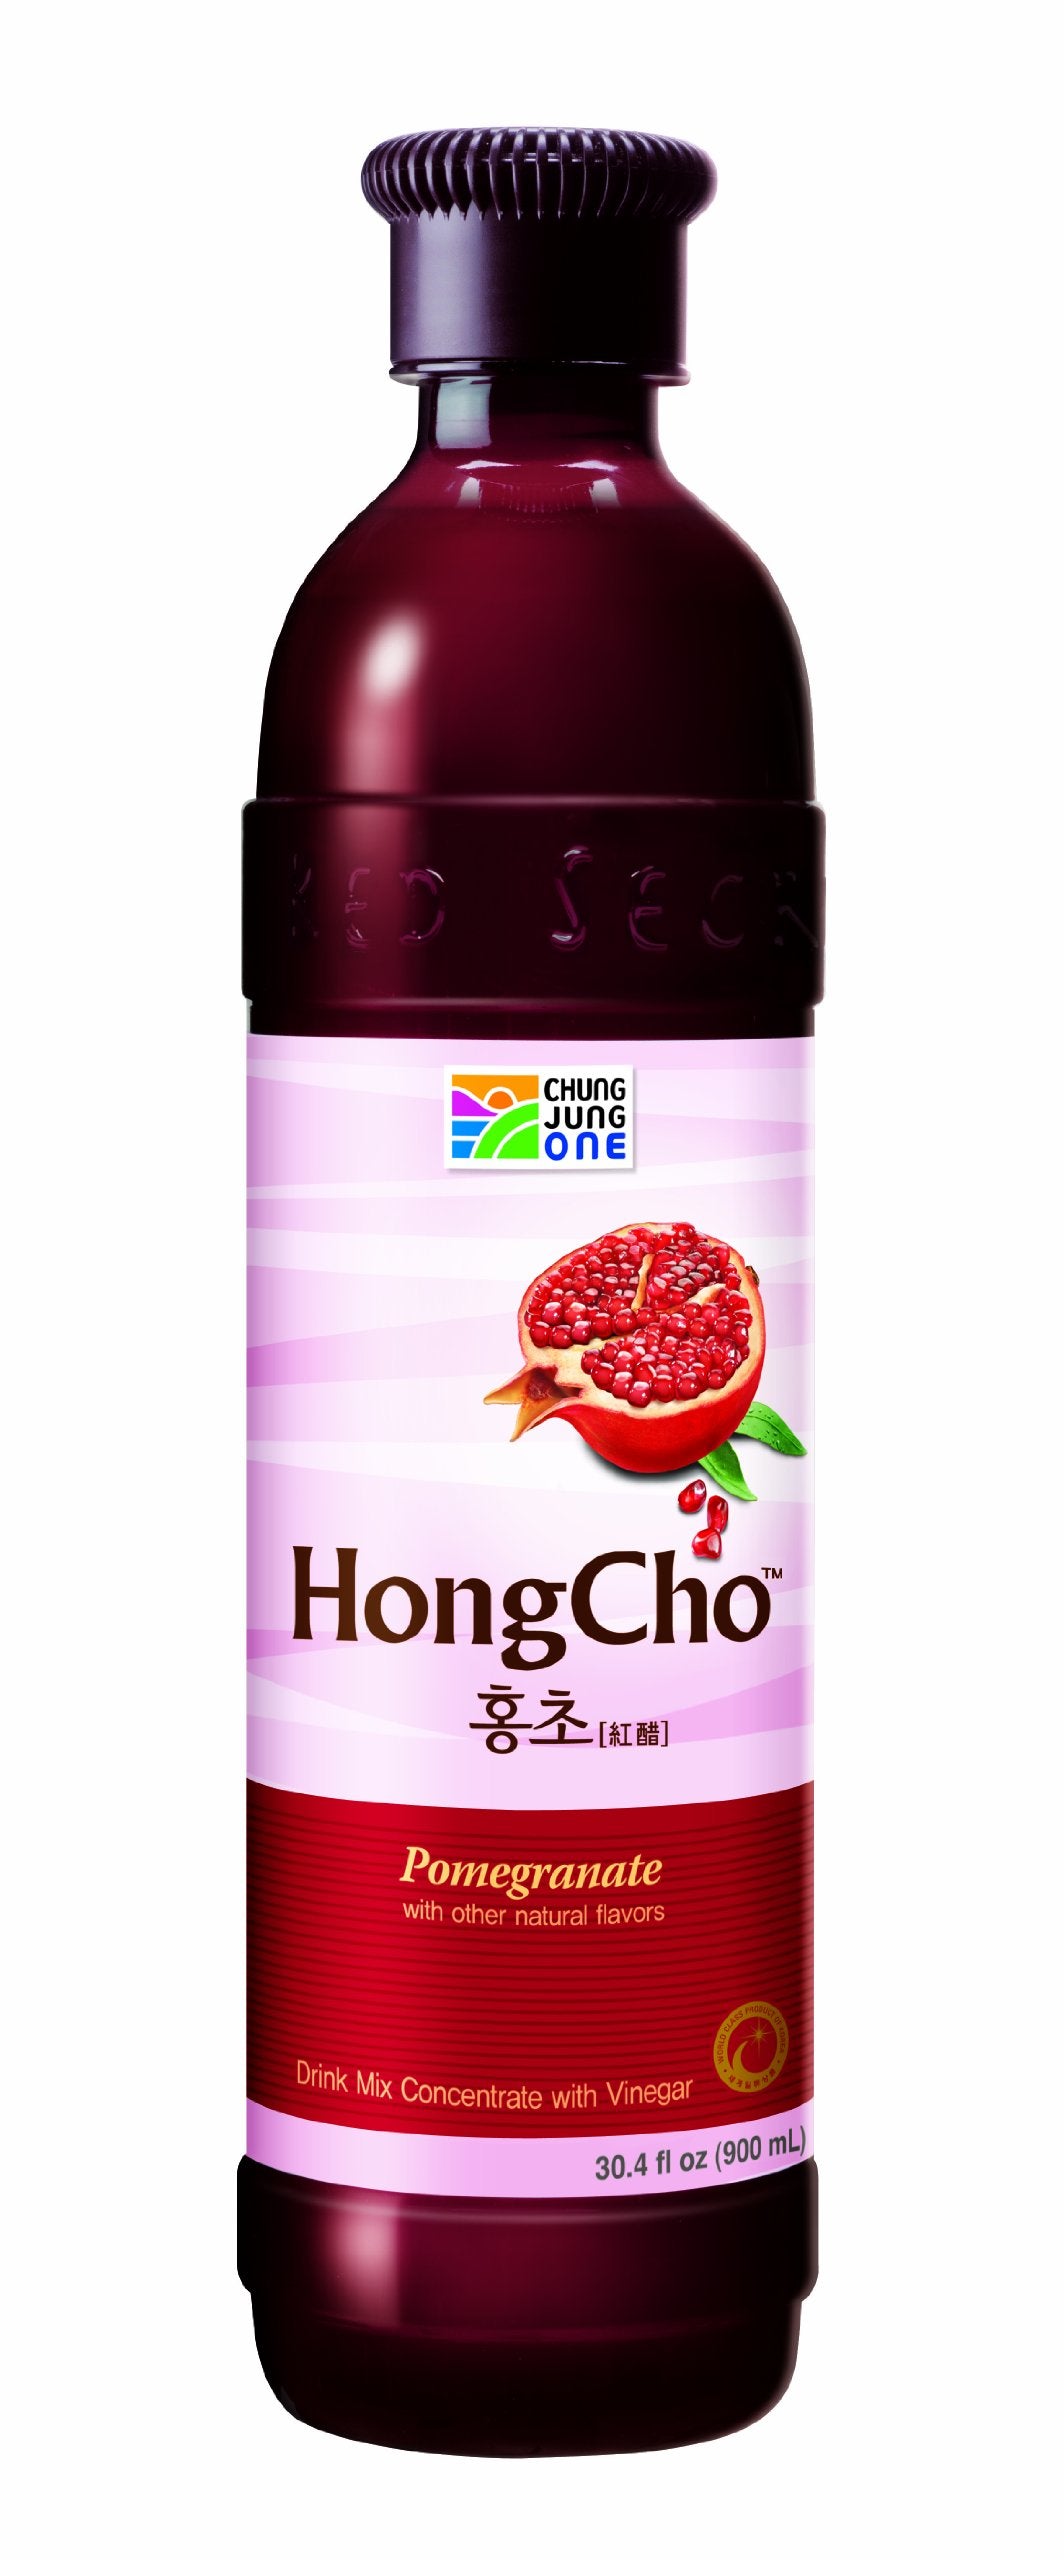 Chung Jung One Hong Cho: Drink Mix Concentrate with Vinegar (30.4oz) (900ml) Pomegranate (Pack of 2)